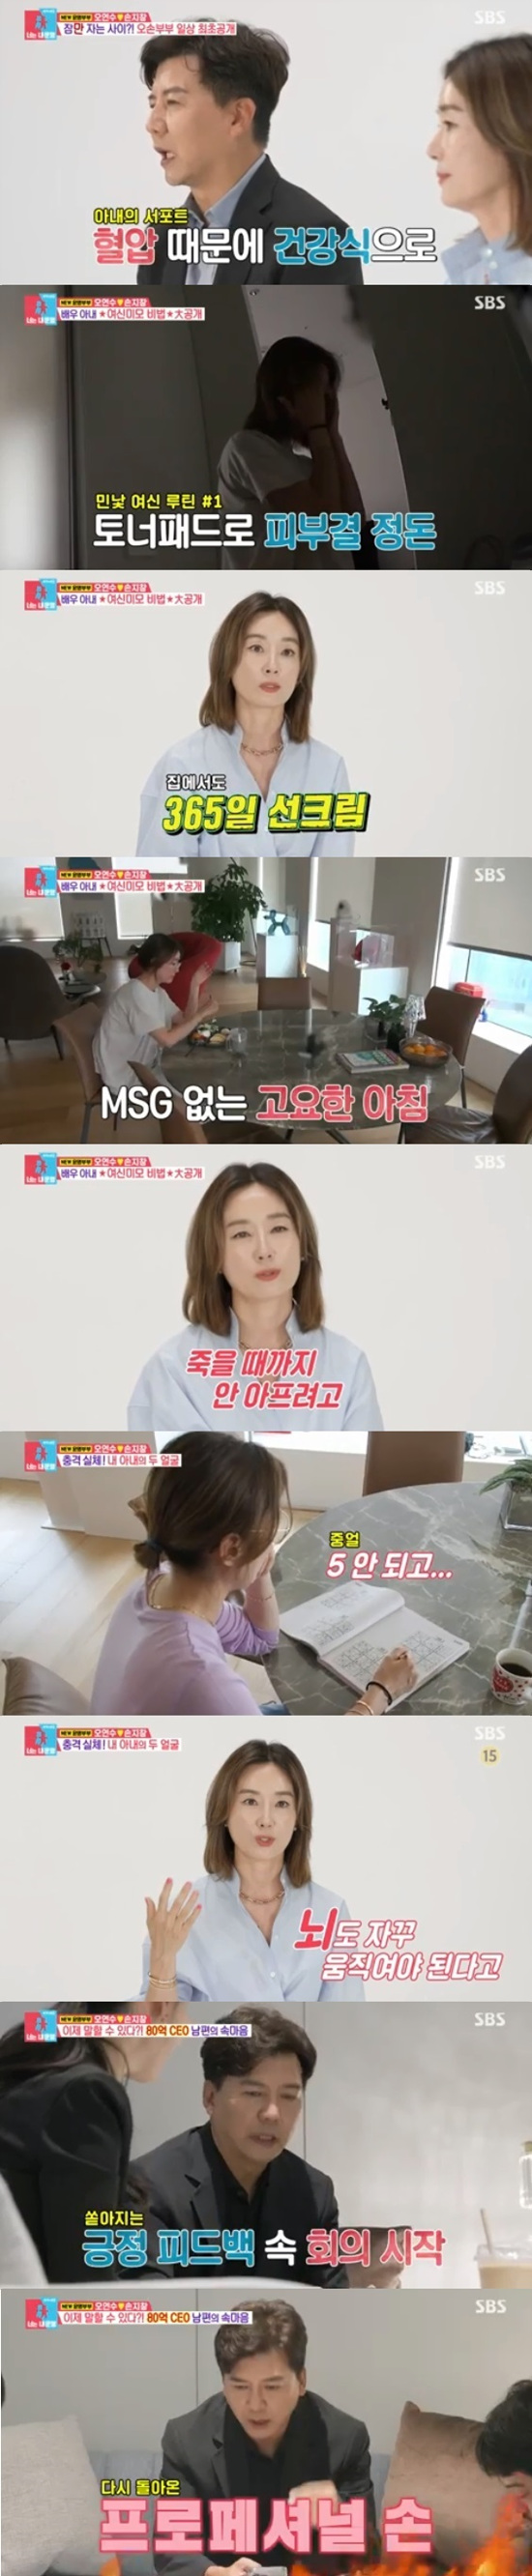 Oh Yeon-soo has shown himself to be the king of self-management.On SBS Same Bed, Different Dreams 2: You Are My Dest - You Are My Destiny broadcasted on the 3rd, Oh Yeon-soo - Son Ji Chang Couple revealed the marriage life of 26 years.On this day, Son Ji Chang woke up early in the morning and made Breakfast with homemade vegetable juice, tangerines and boiled eggs. Son Ji Chang checked his blood pressure and went to work at 10 oclock.Son Ji Chang, a 24-year-old event planning businessman, had a client meeting with his employees.Oh Yeon-soo stood up at around 11 oclock after Son Ji Chang came to work and boasted a beautiful face. Oh Yeon-soo meticulously emphasized the importance of Sunscreen.Oh Yeon-soo said that Son Ji Chang always nags because he does not use Sunscreen.Oh Yeon-soo sat dazed on the couch, drinking a glass of lukewarm water. Oh Yeon-soo said, Im always low until 12. Im always dazed.Oh Yeon-soo chewed slowly and chewed lightly with Breakfast with black bean soy milk, apple, cabbage, celery and tomato salad.Son Ji Chang said, Oh Yeon-soo, who cares about health care, will live for a thousand years.Oh Yeon-soo said, The best pro is name, secret of life history, he said. I do not want to live long, but I do not want to be sick until I die.At that time, Son Ji Chang called Oh Yeon-soo after finishing the client meeting. Son Ji Chang simply said what he wanted to say and hung up. Oh Yeon-soo said, Im really not curious because Husband reports.I never called. When I called, Husband was surprised to know what was going on. Oh Yeon-soo took a handful of nutritional supplements and called the AS and got caught in Ladies Lunchtime.Oh Yeon-soo is usually late, so I always get to Ladies Lunchtime to schedule a visit to a bank or a government office.Oh Yeon-soo said, I heard Sudoku from a well-known teacher saying that the brain should keep moving.Oh Yeon-soo confirmed that the hidden picture book ordered for brain exercise was for children and contacted Lee Kyung-min, a close makeup artist with a granddaughter, to give the book.Oh Yeon-soo went out after Sudoku with coloring and whole body stretching.Son Ji Chang went on a schedule to find a hotel that was a marriage event.Son Ji Chang confessed to the troubles of businessmen such as an anecdote that had suffered while competing PT in a situation where a specific company was nominated, and the story that a male client caught his butt in an overseas event.Photo=SBS broadcast screen